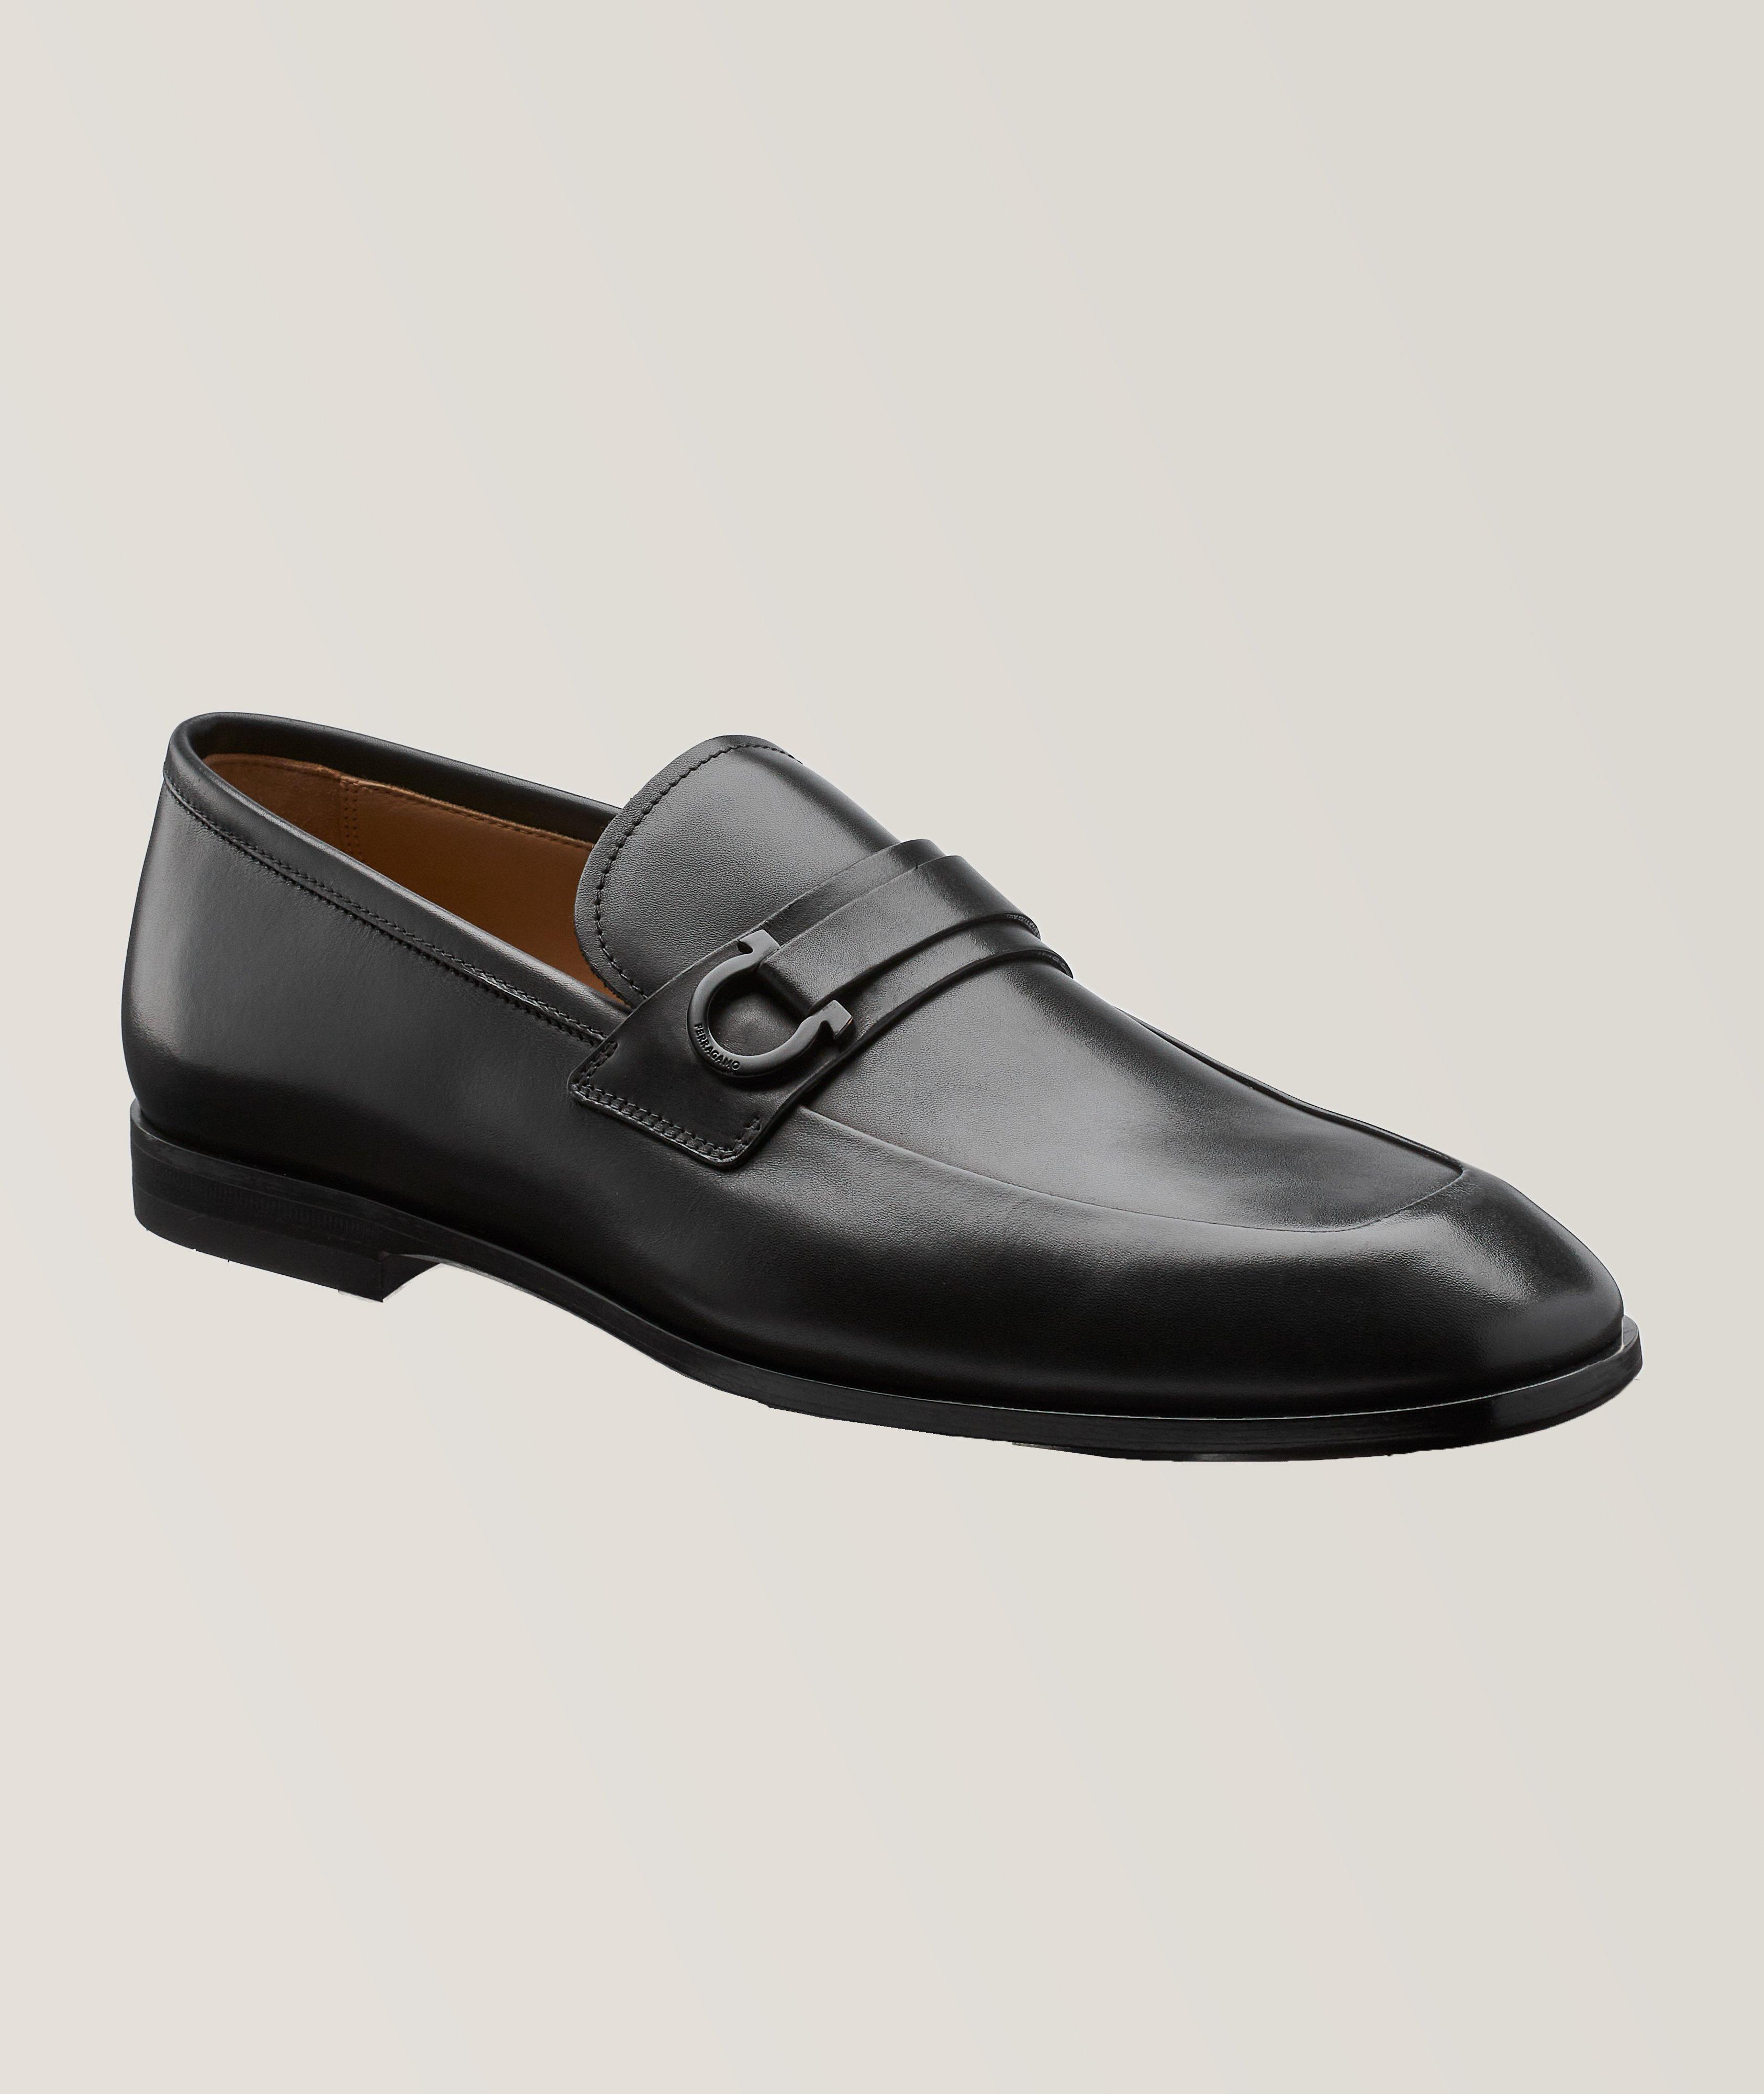 Florio Burnished Leather Loafers image 0